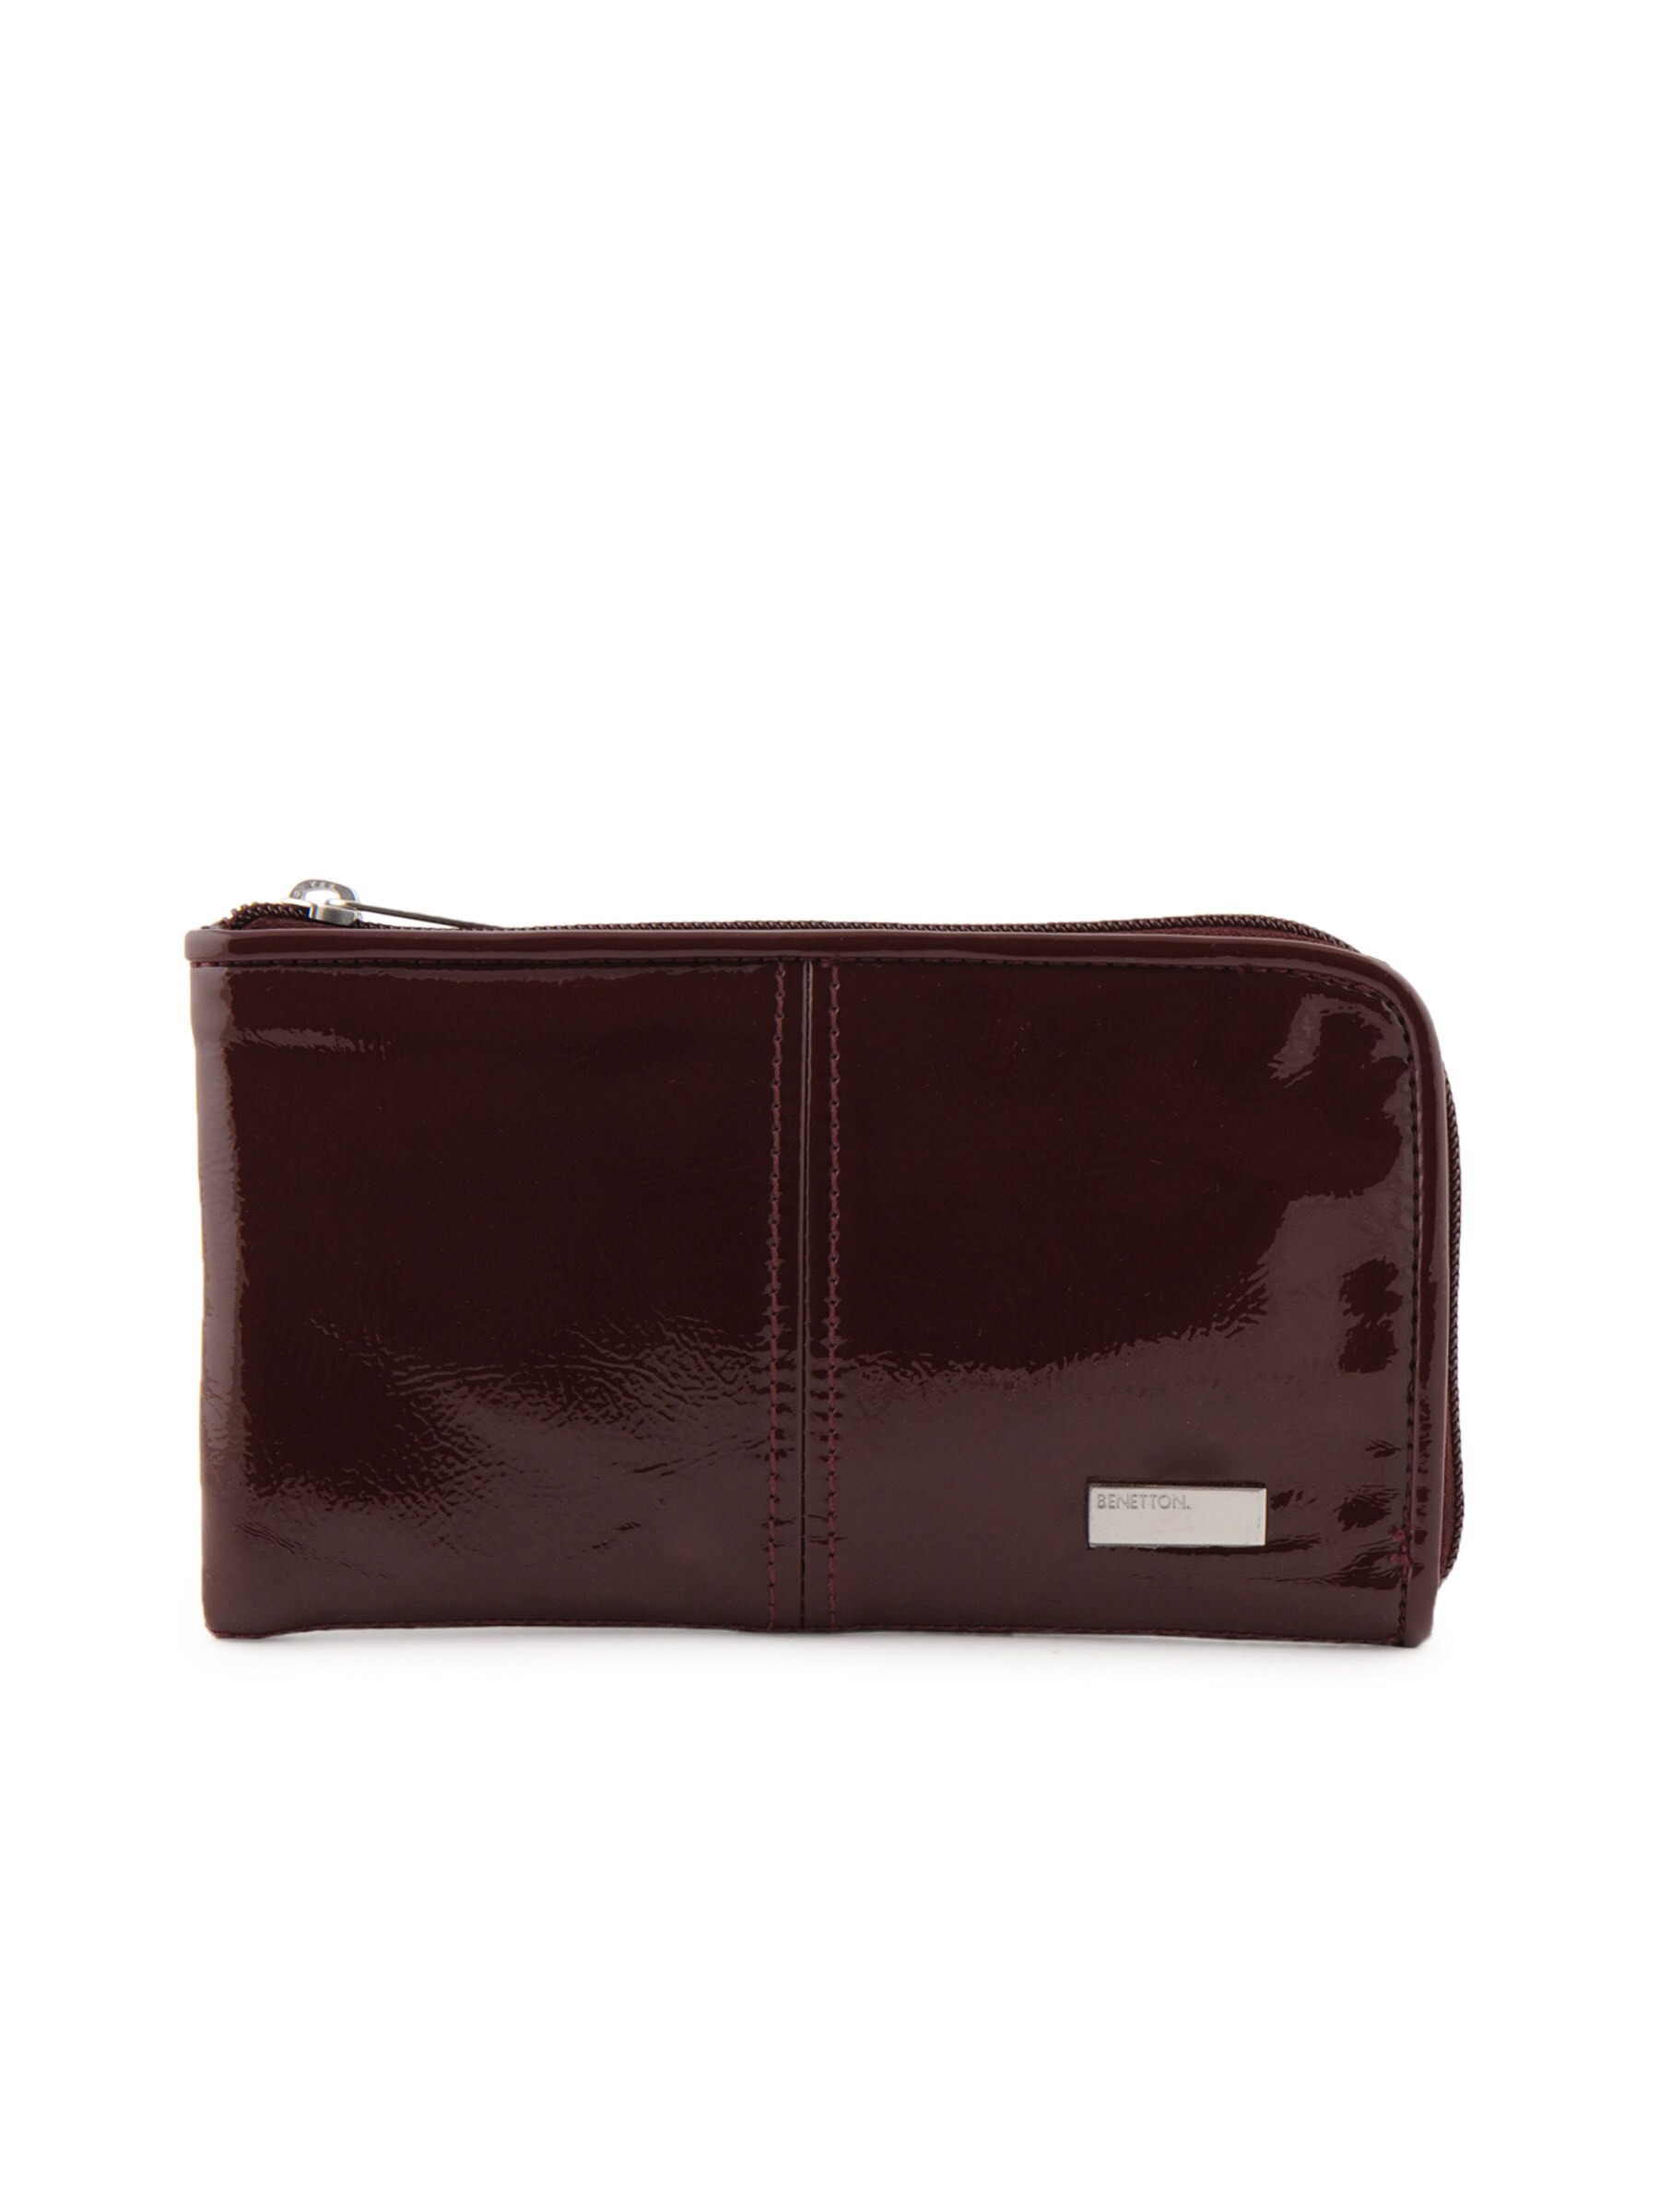 United Colors of Benetton Women Solid Maroon Wallets